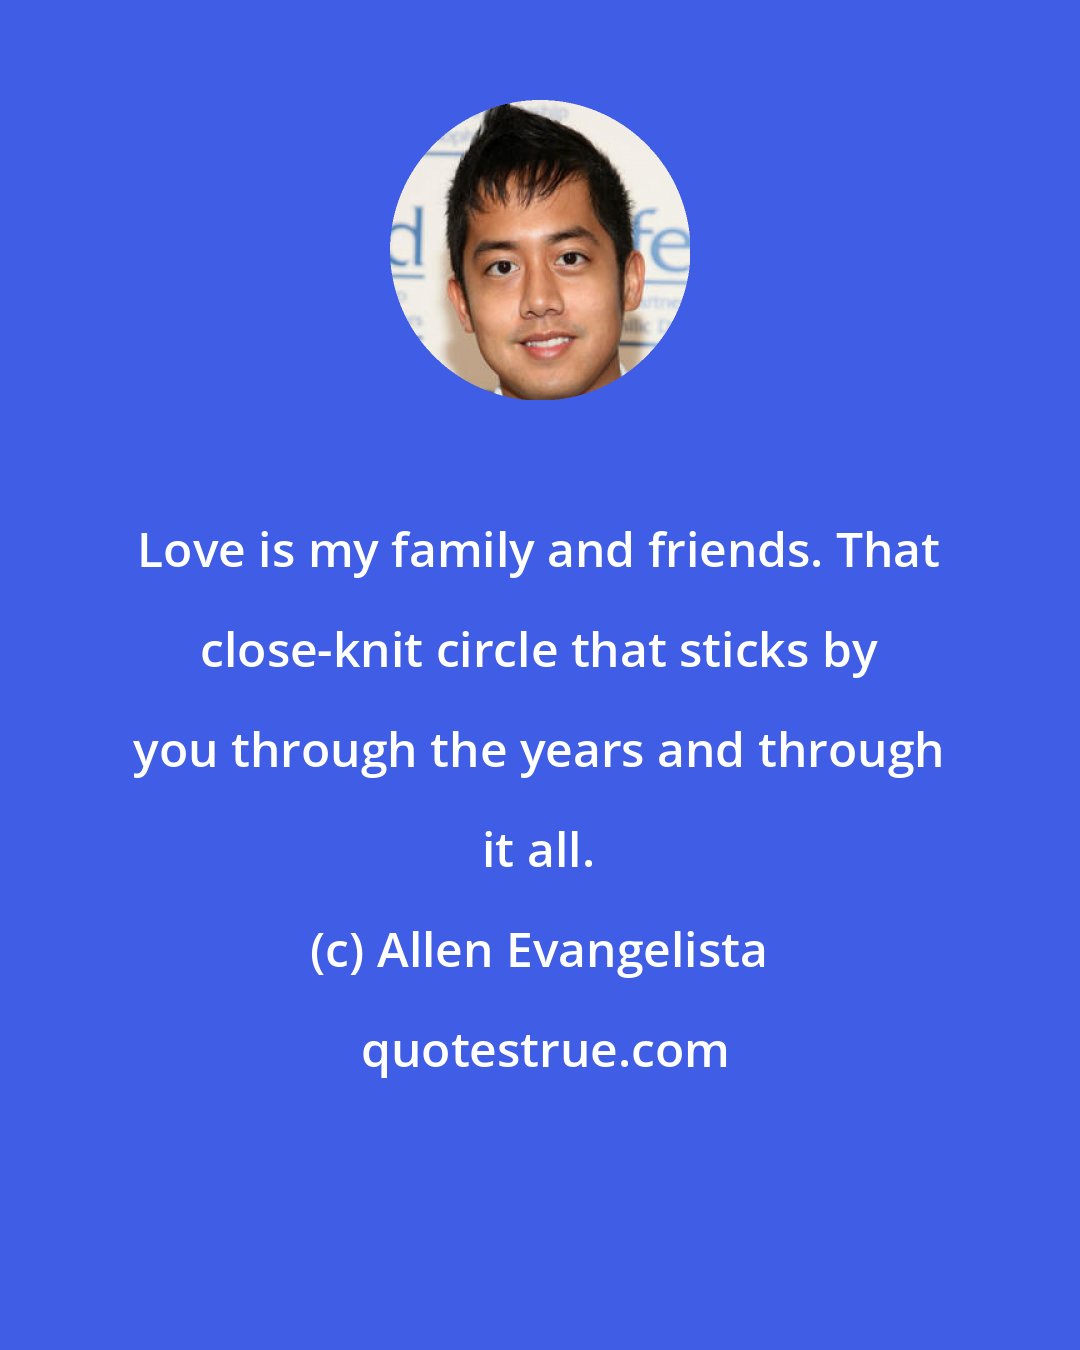 Allen Evangelista: Love is my family and friends. That close-knit circle that sticks by you through the years and through it all.